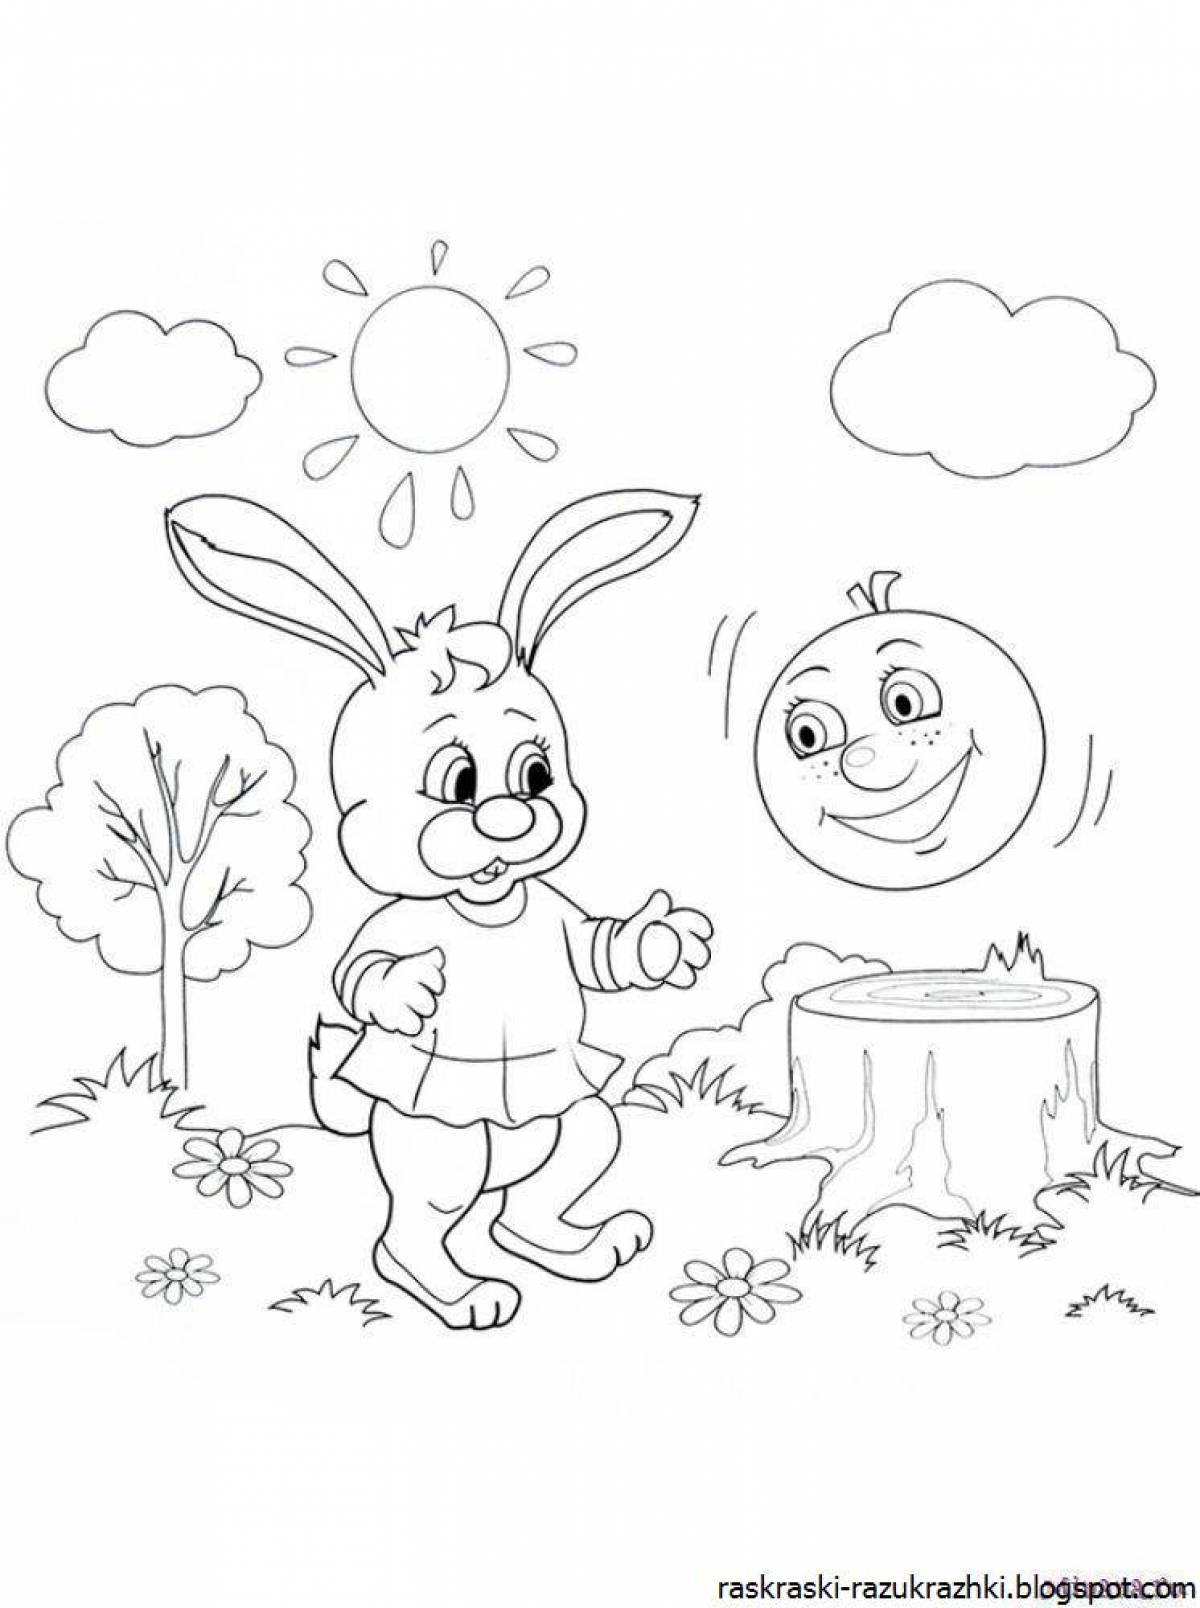 Amazing kolobok coloring pages for kids